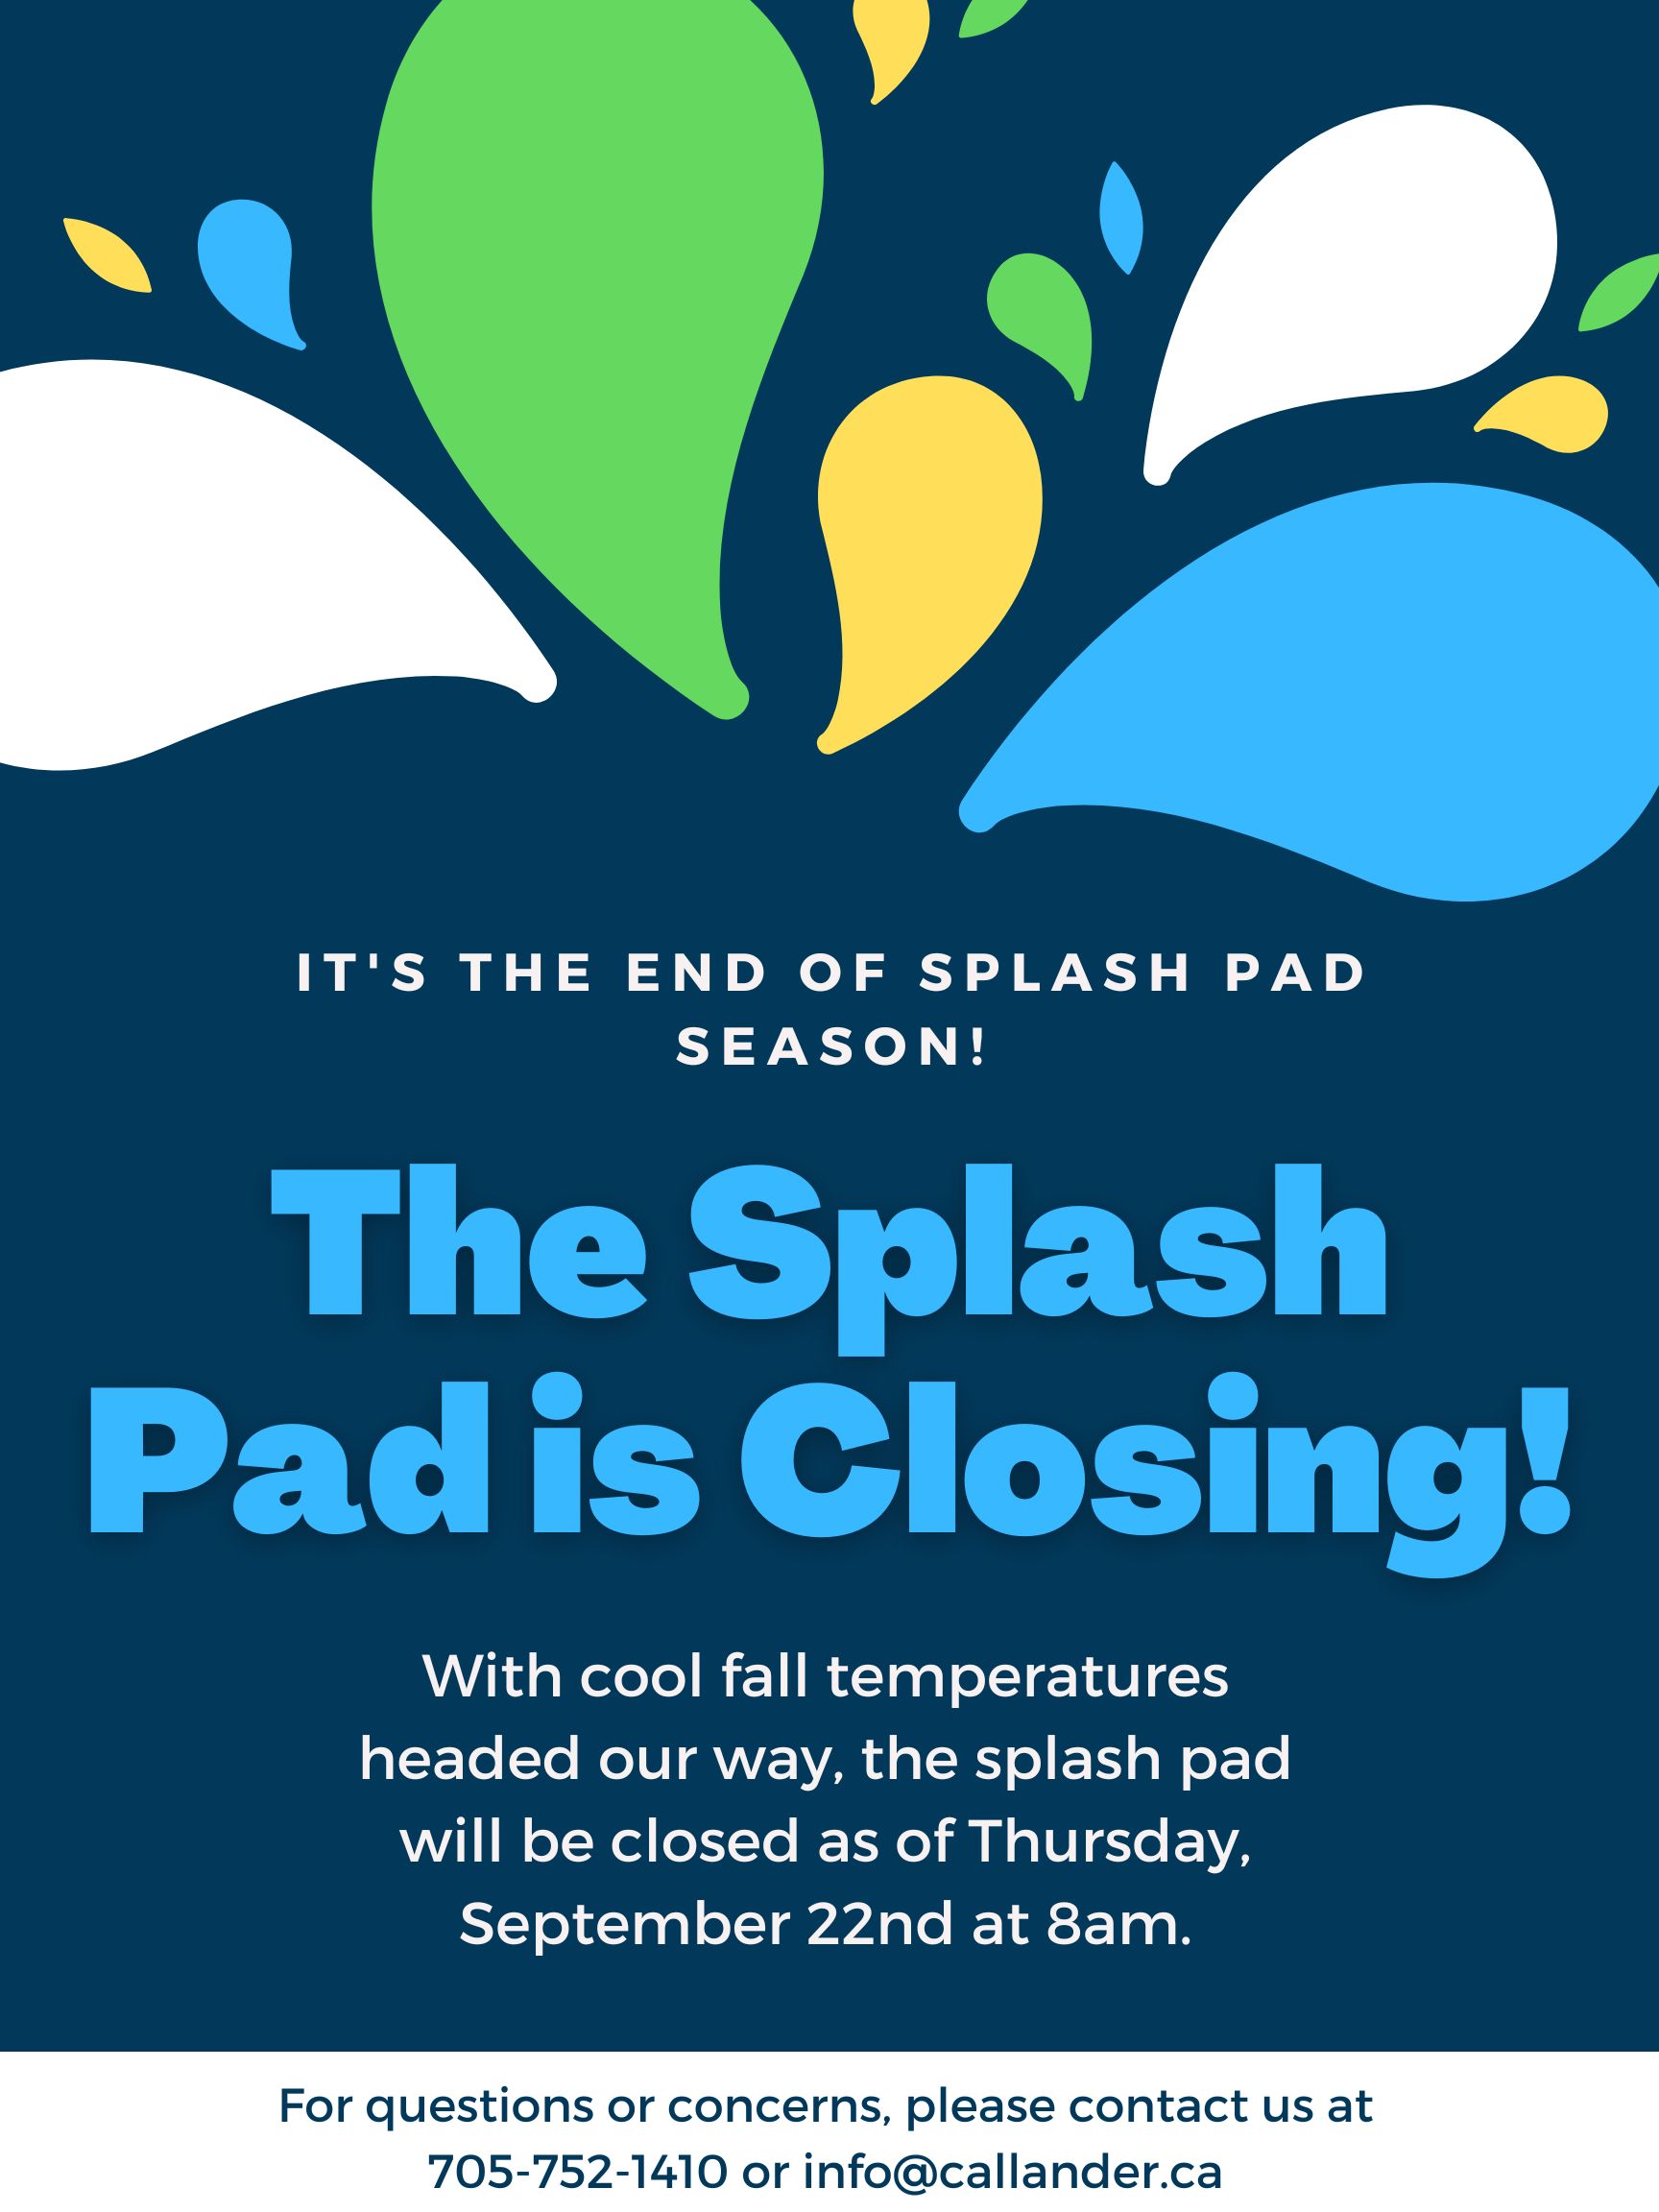 It's the end of Splash Pad season!   The Splash Pad is Closing!   With cool fall temperatures headed our way, the splash pad will be closed as of Thursday, September 22nd at 8 am.   For questions or concerns, please contact us at 705-474-1410